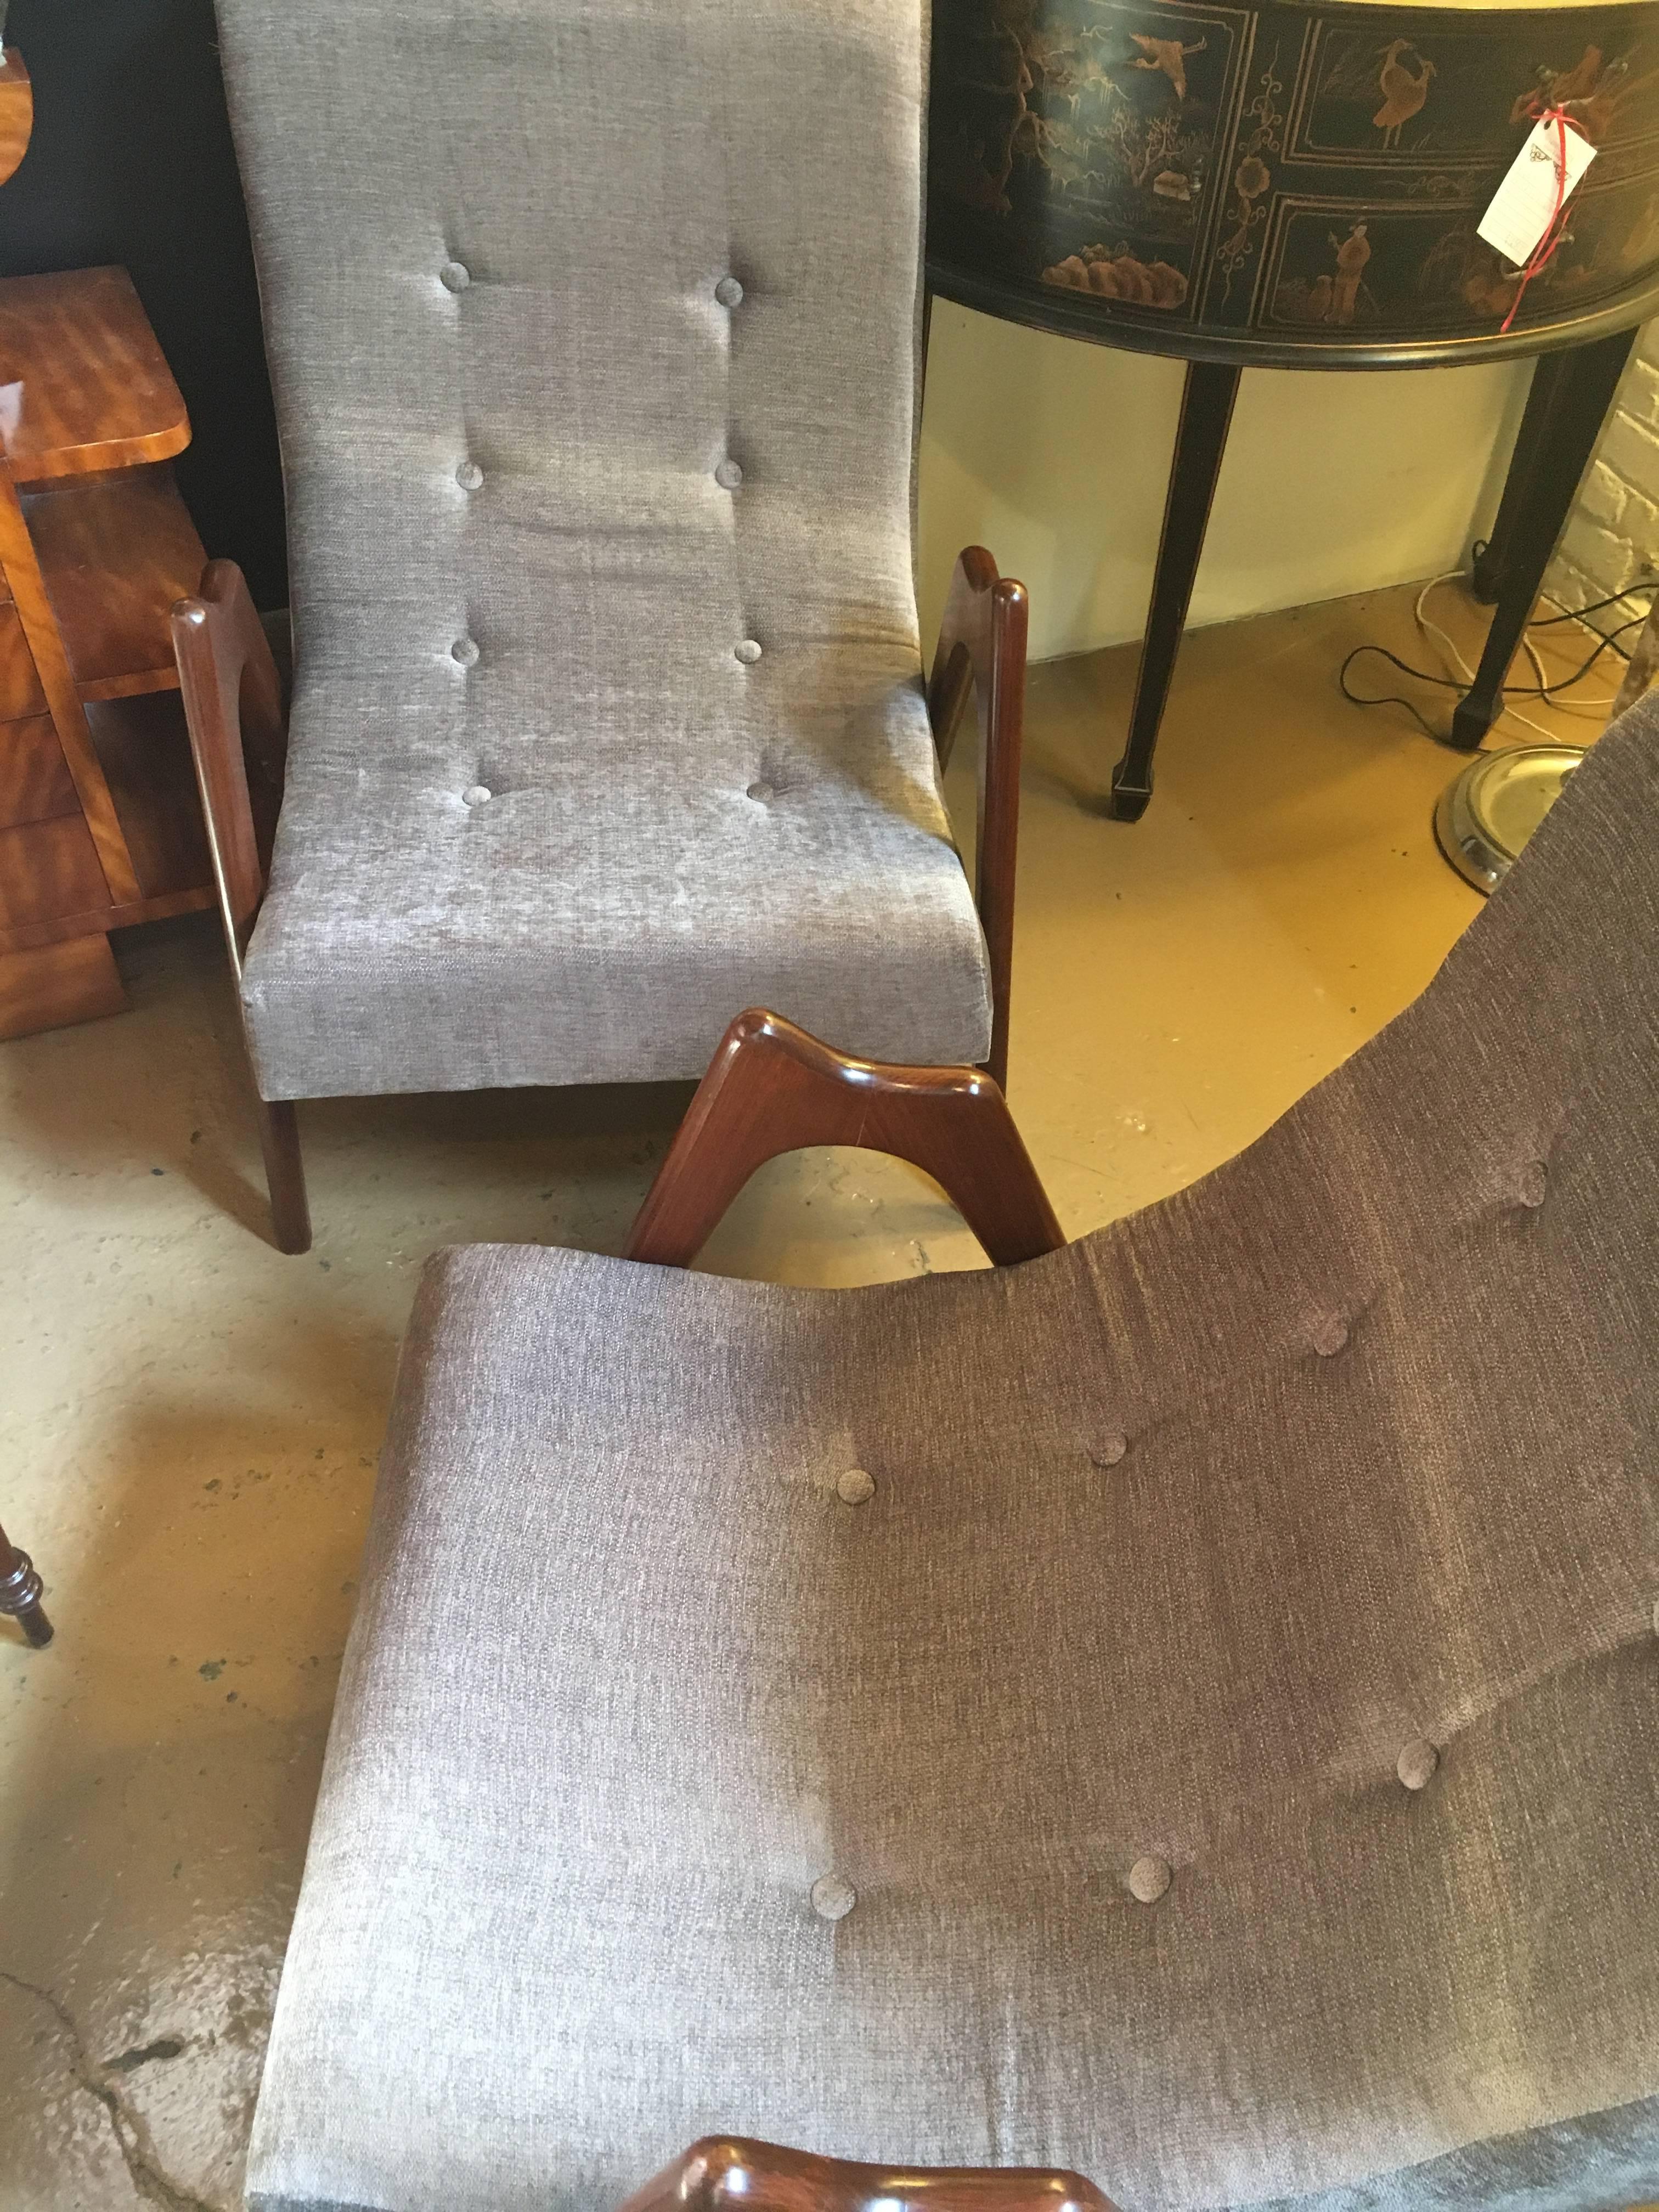 Pair of Newly Upholstered Mid-Century Modern Armchairs 4